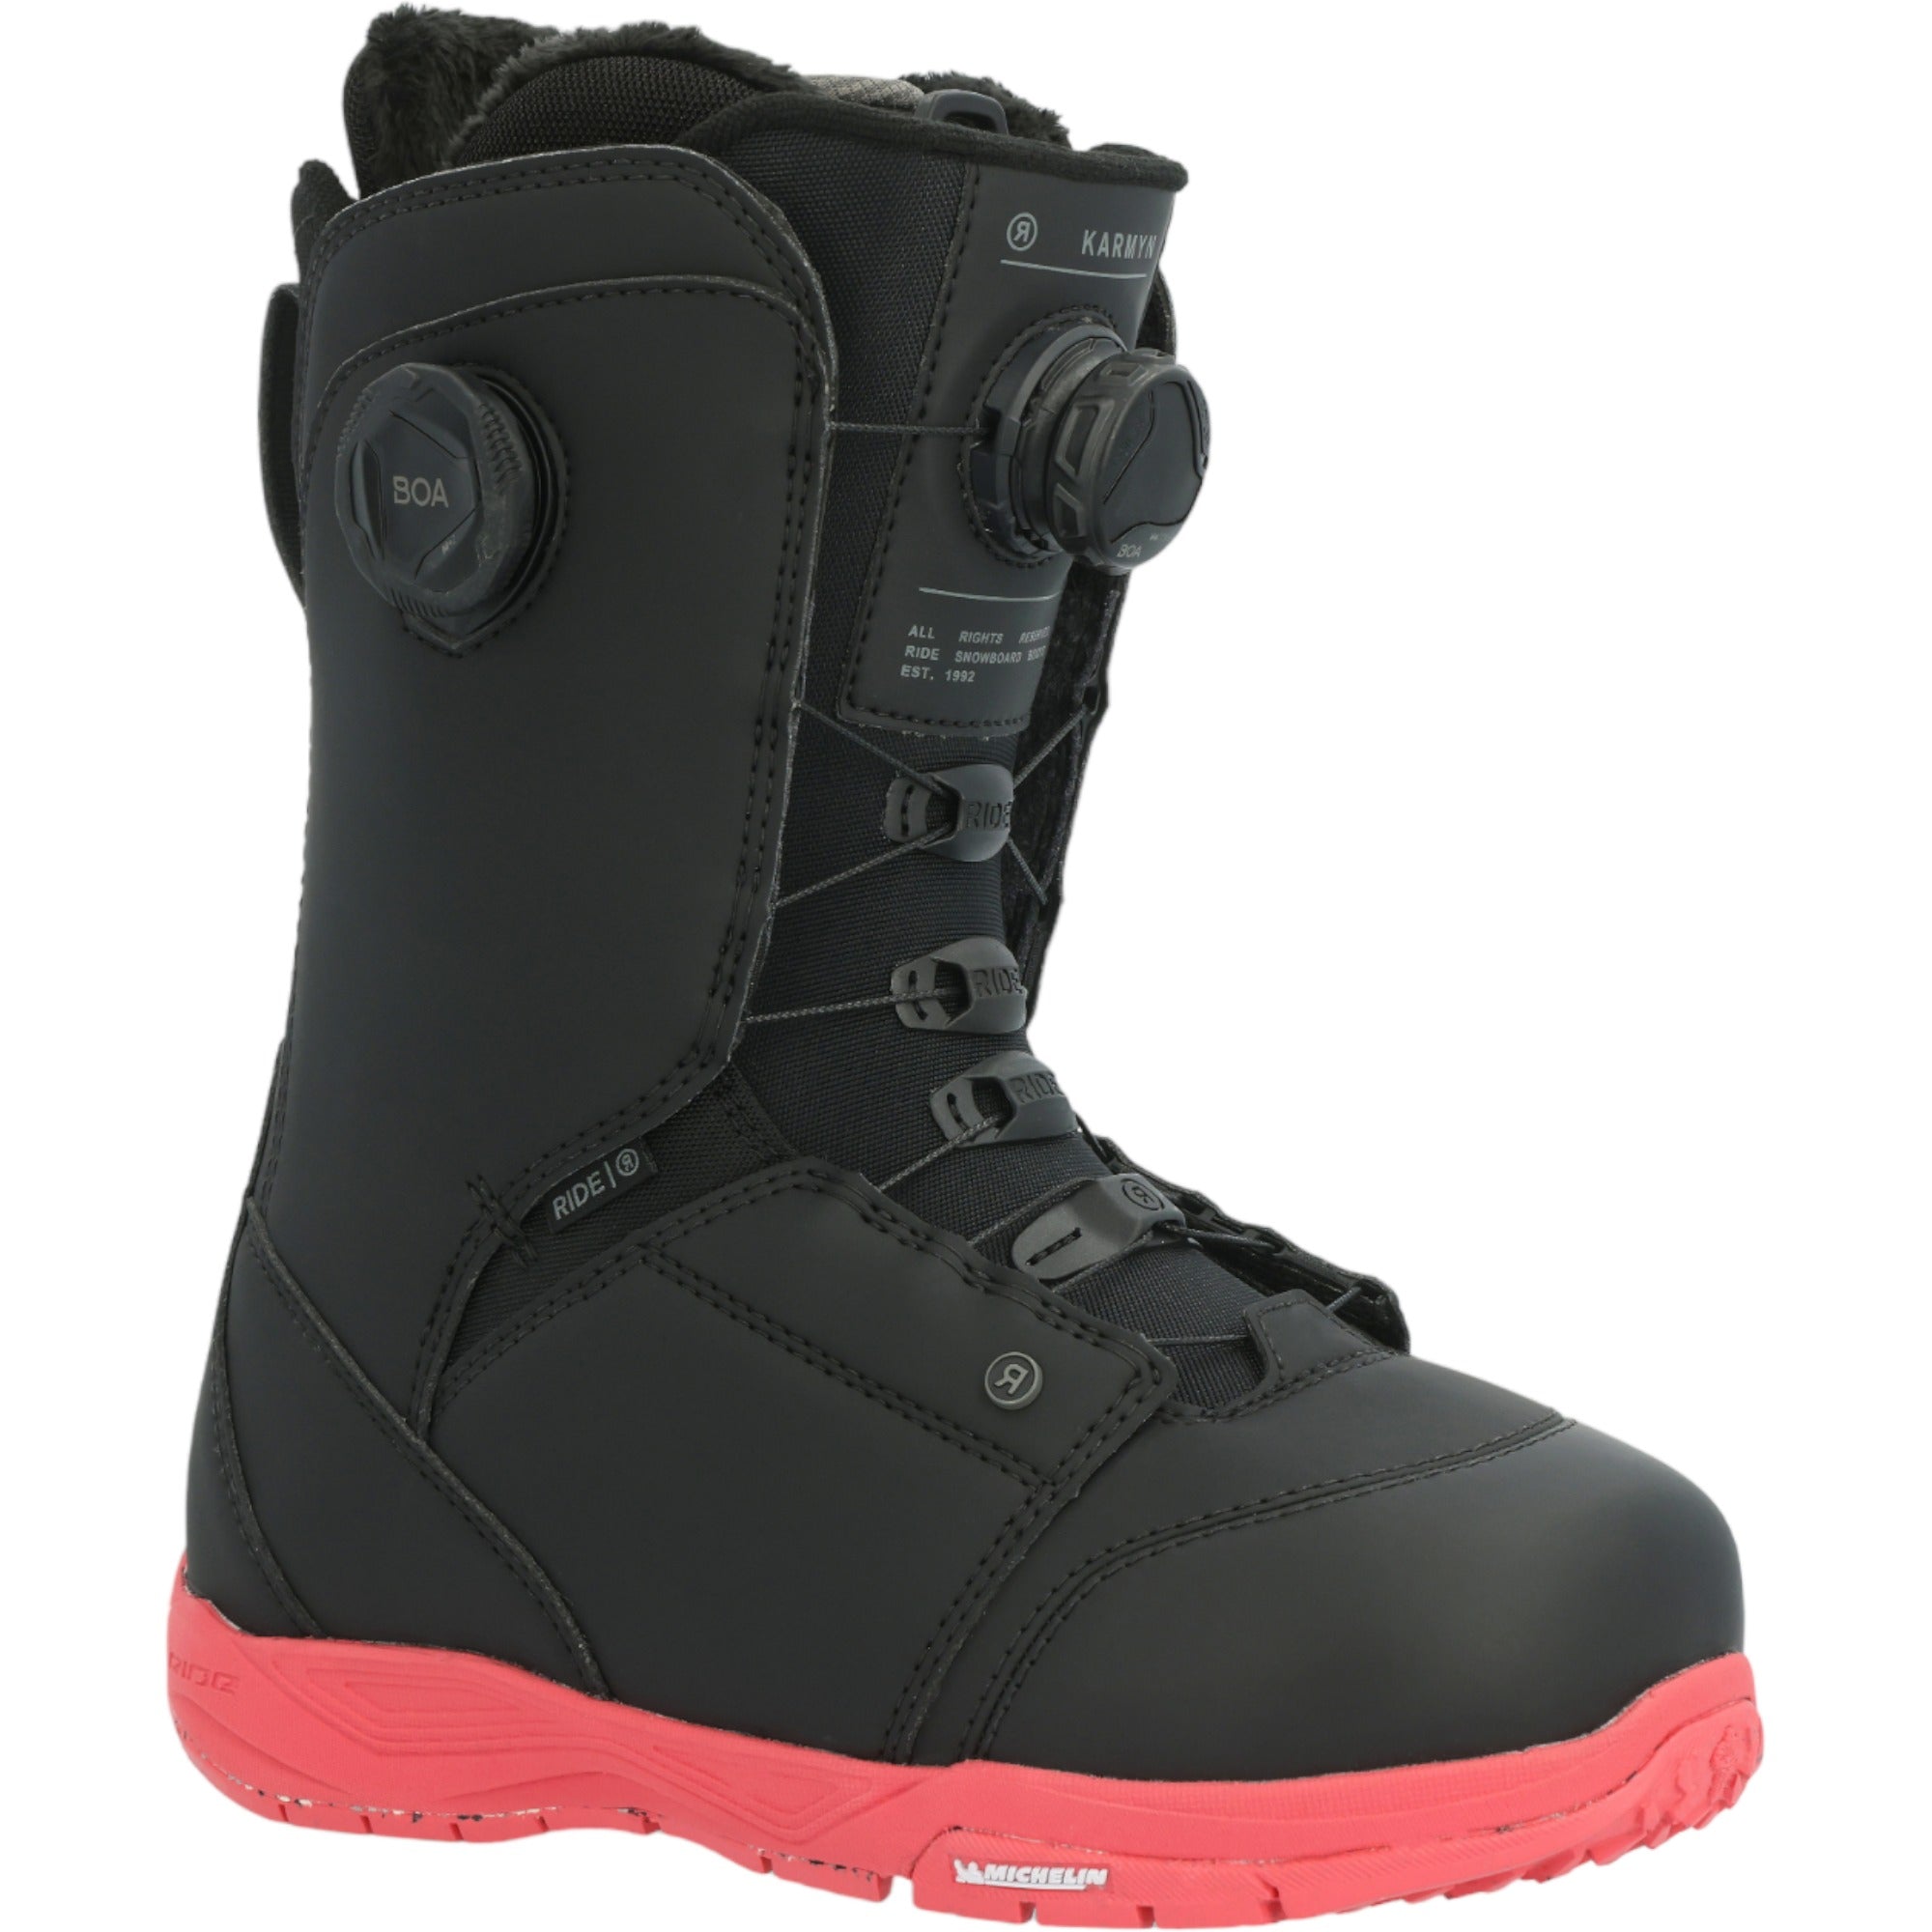 Snowboards Boots for Women – Oberson